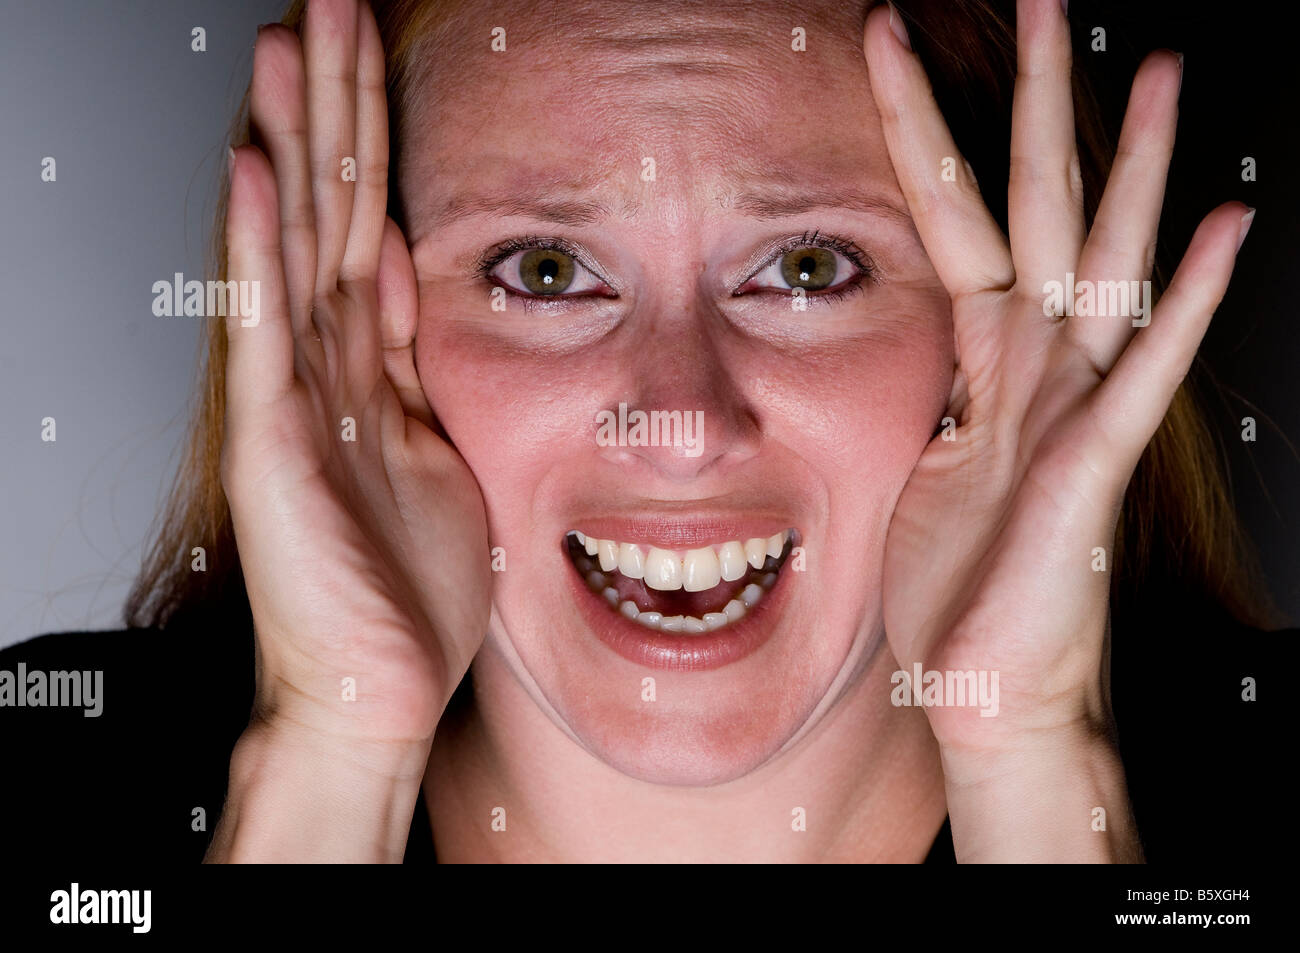 Young woman looking scared through hands stressed. Stock Photo